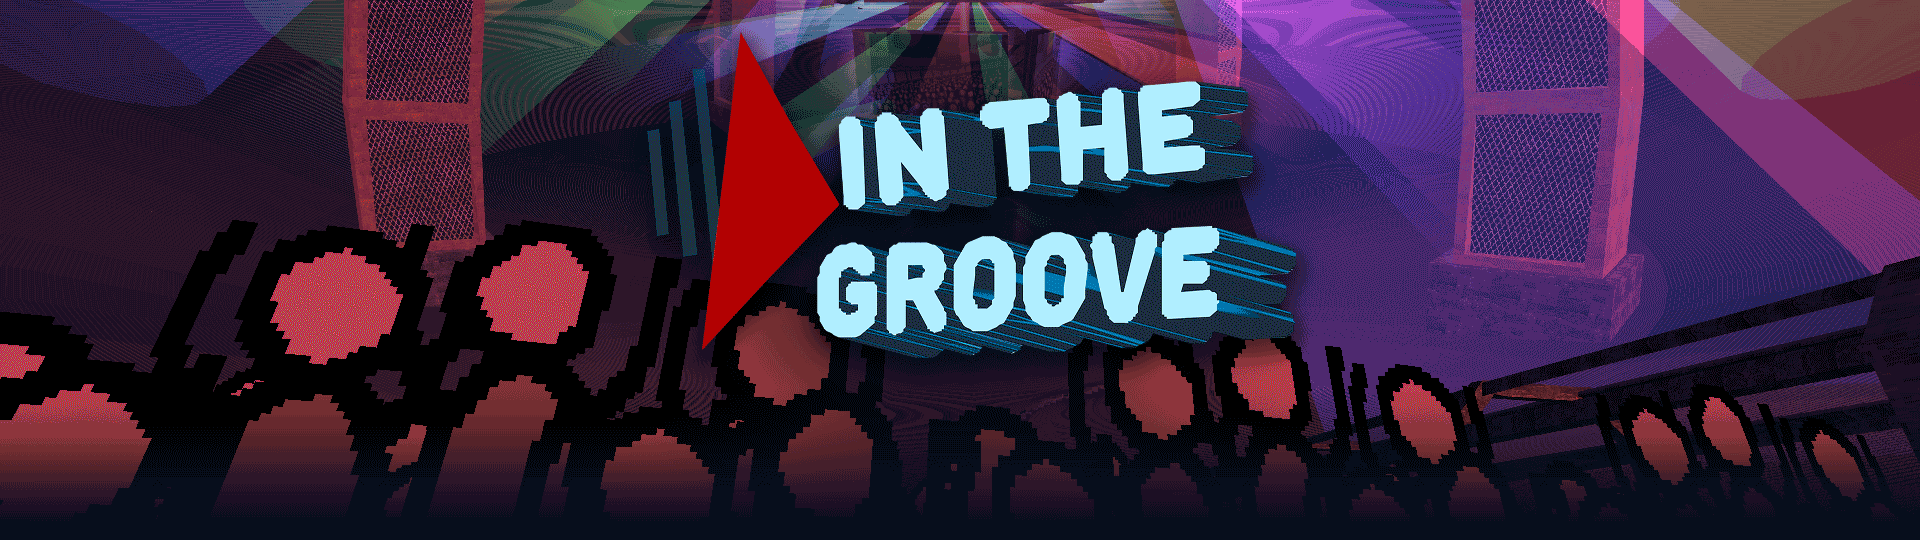 3D BLAST: In The Groove